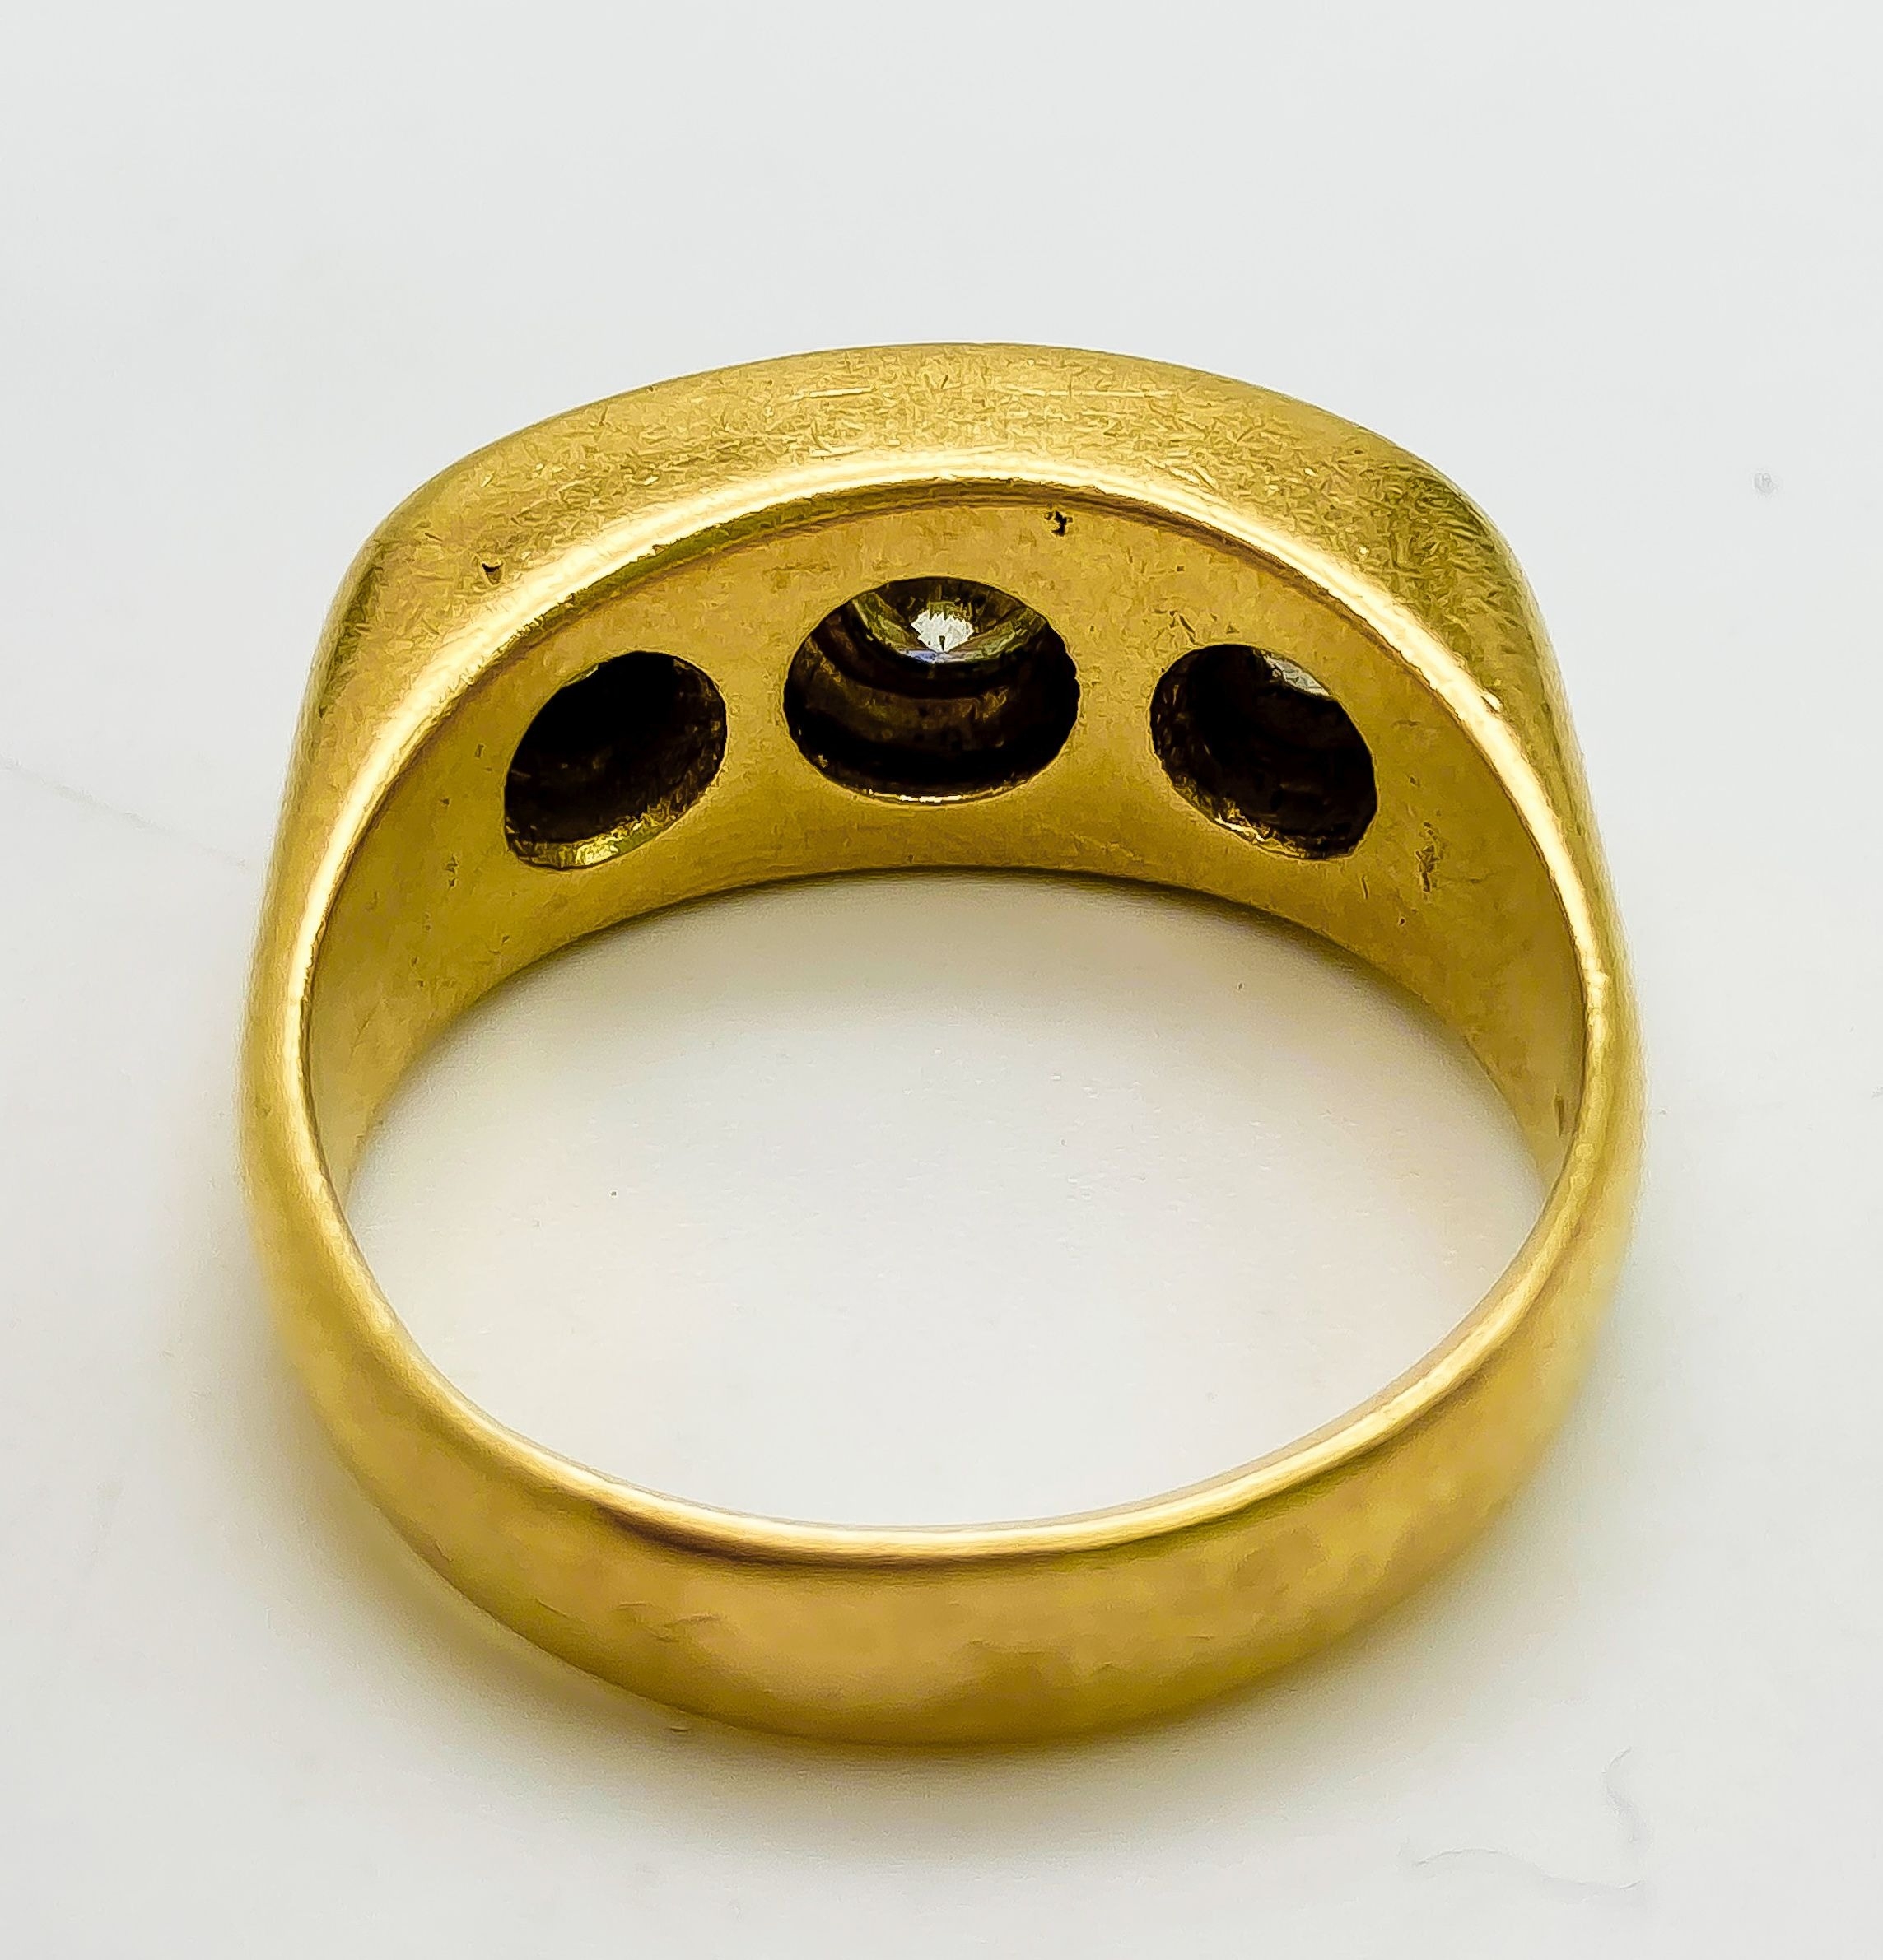 A Vintage 18K Yellow Gold Three Diamond Gypsy Ring. 1ctw. Size U/V. 16.2g total weight. - Image 3 of 5